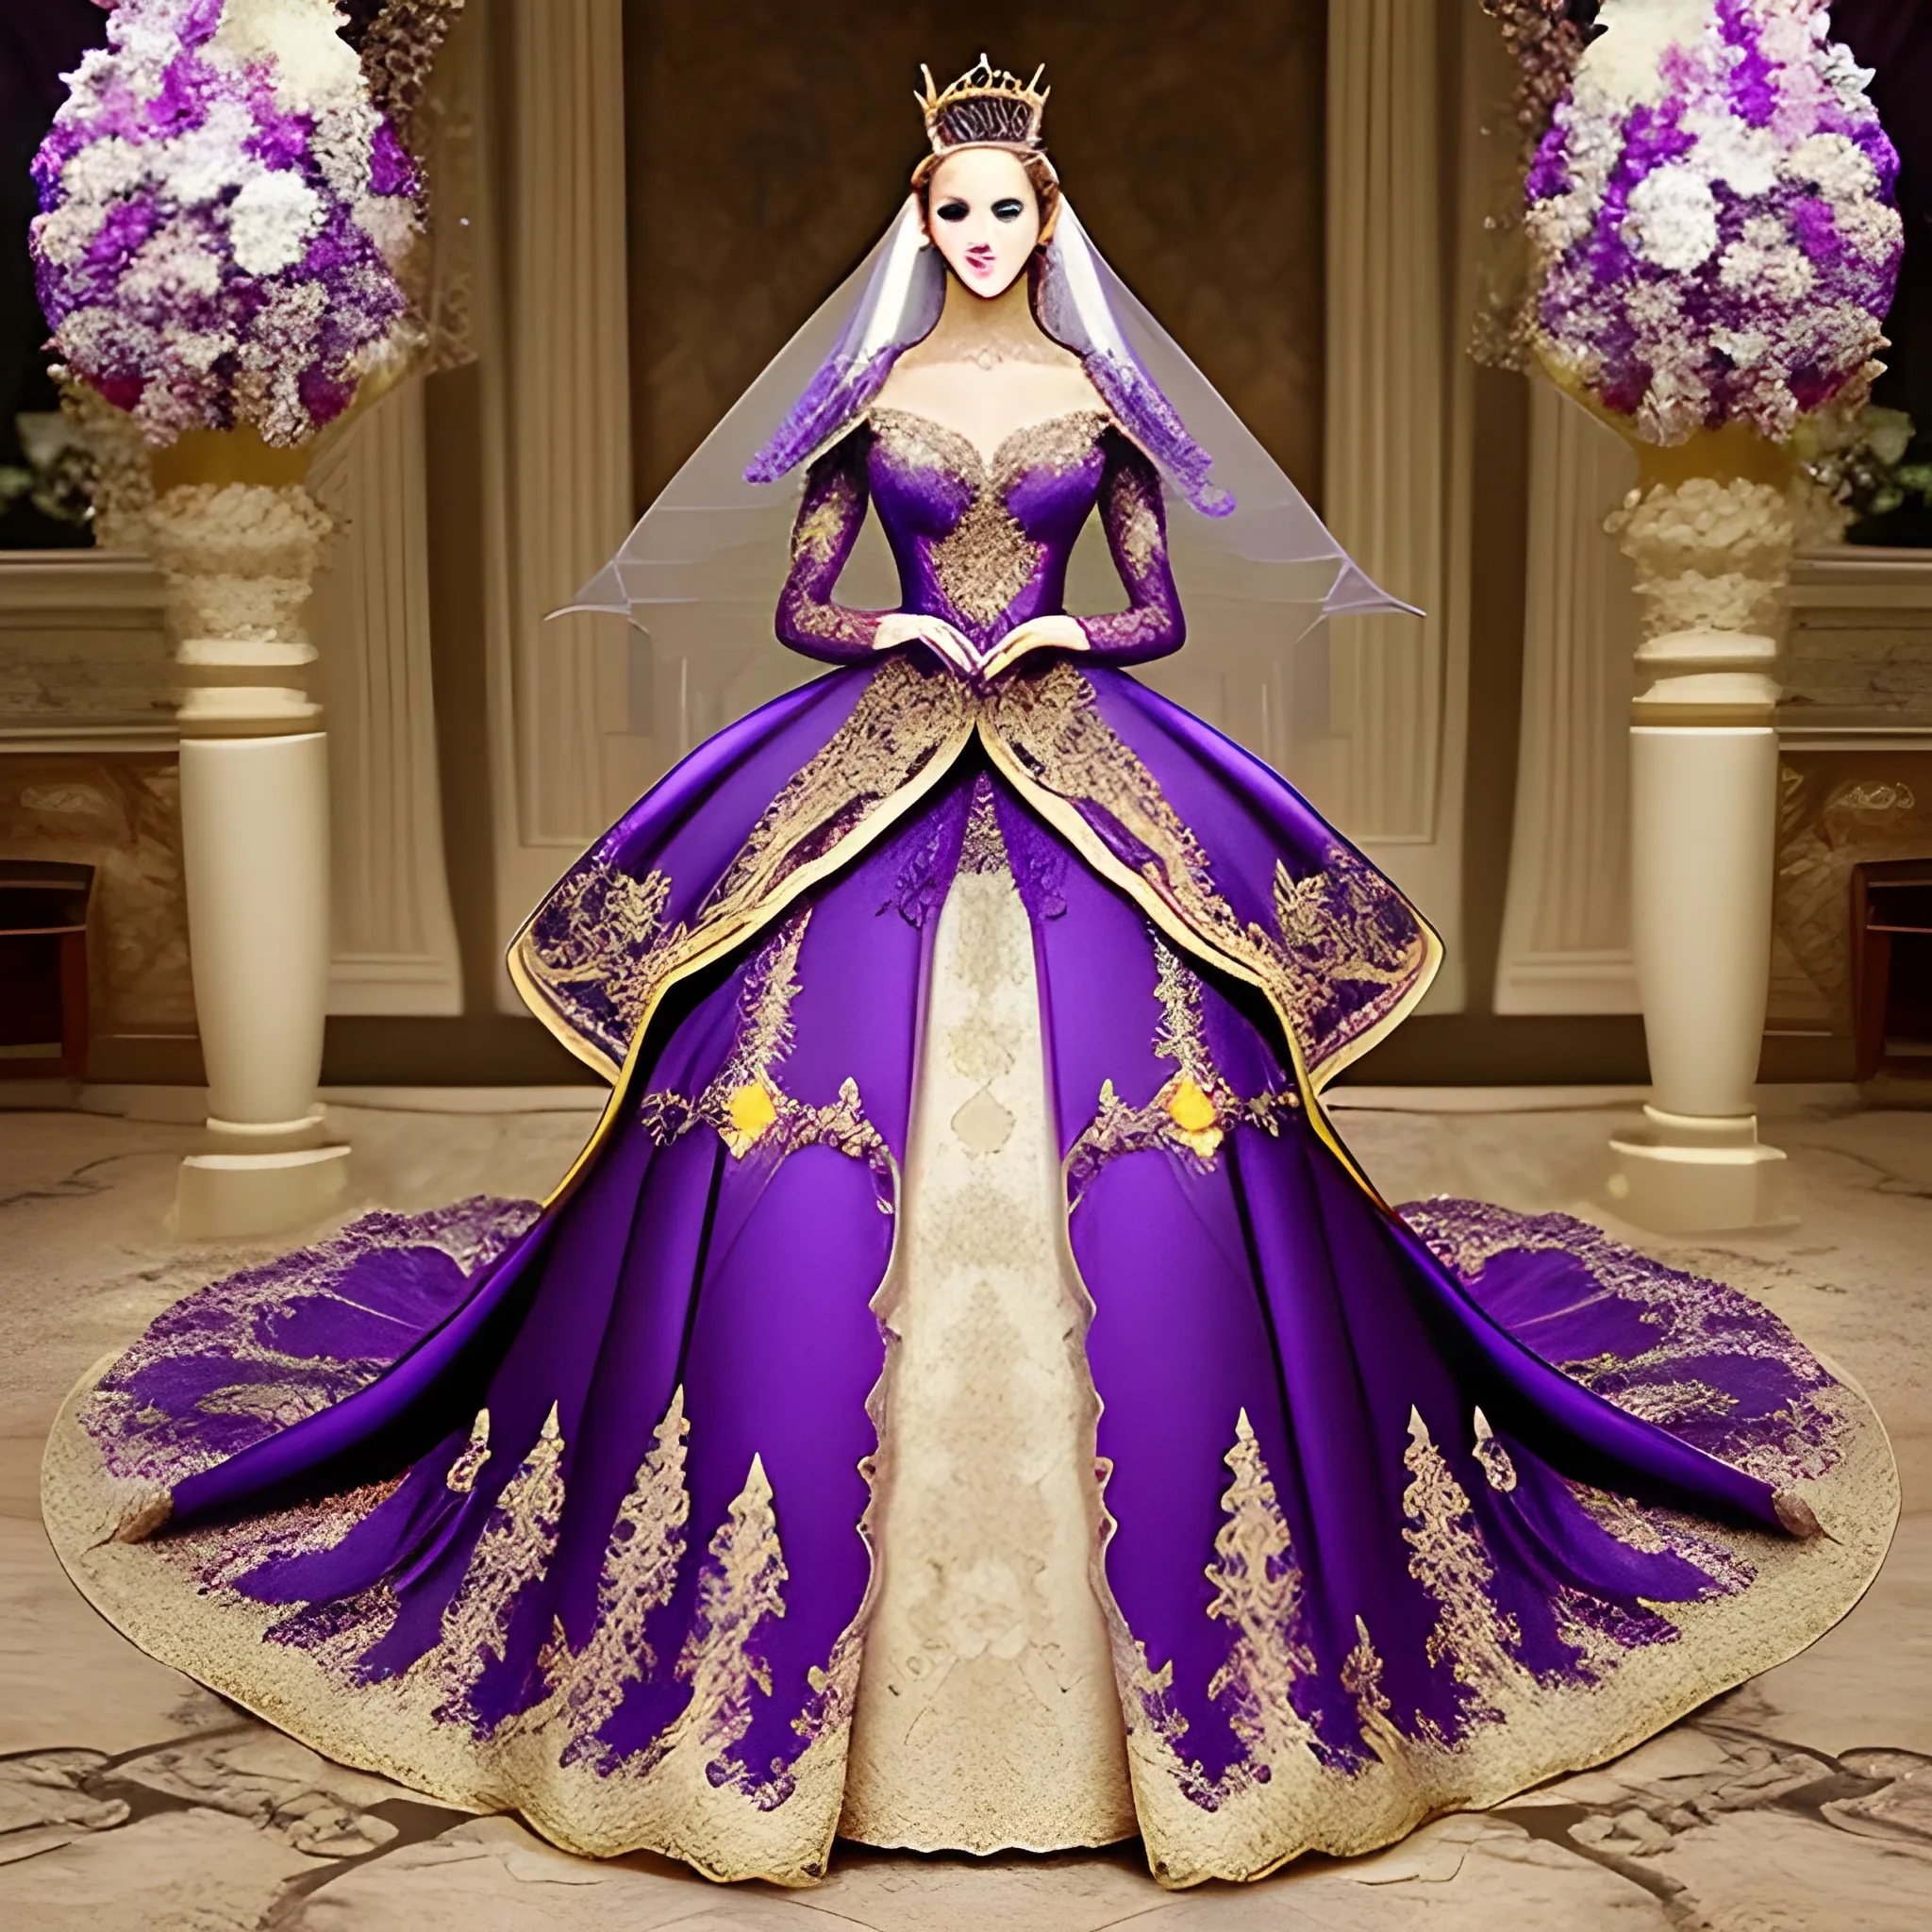 Intricate fantasy wedding gown purple and gold lace goddess train empress sleeves crown style extravagant lace detail, Water Color